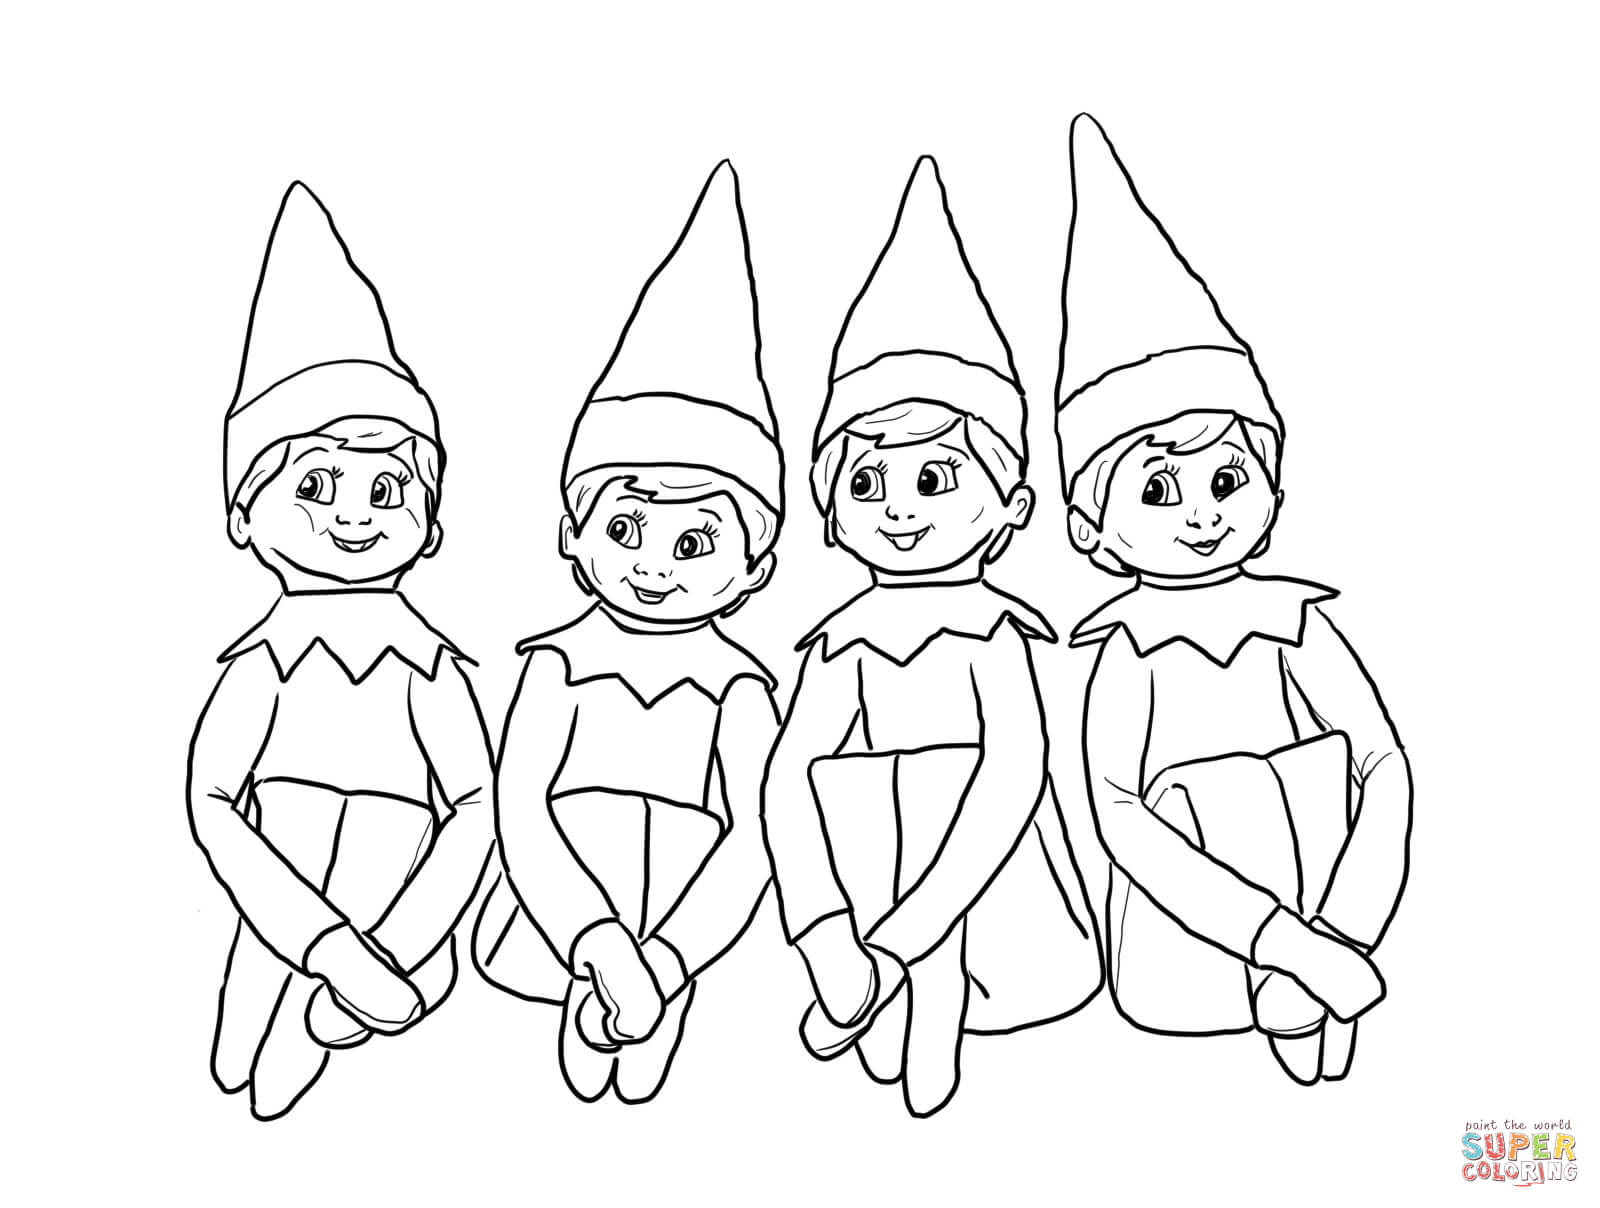 Elf On The Shelf Coloring Pages Elves On The Shelf Coloring Page Free ...